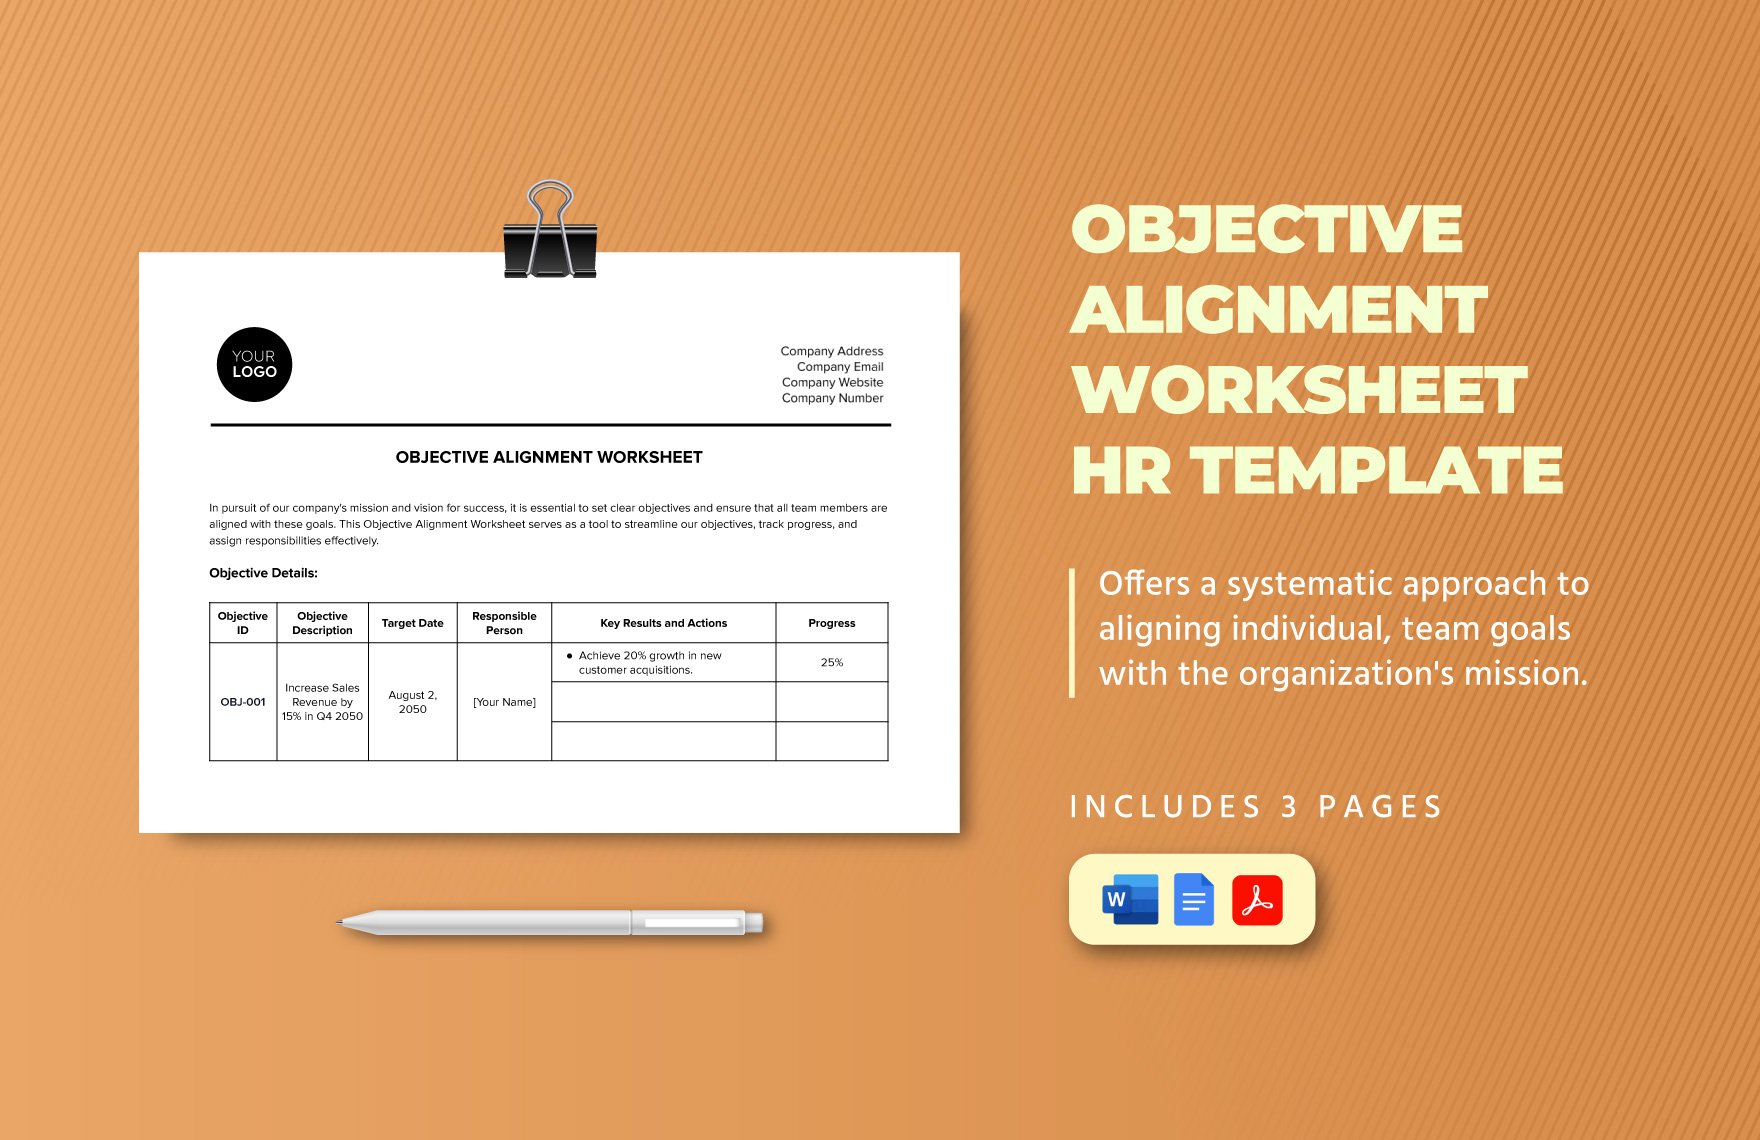 Objective Alignment Worksheet HR Template